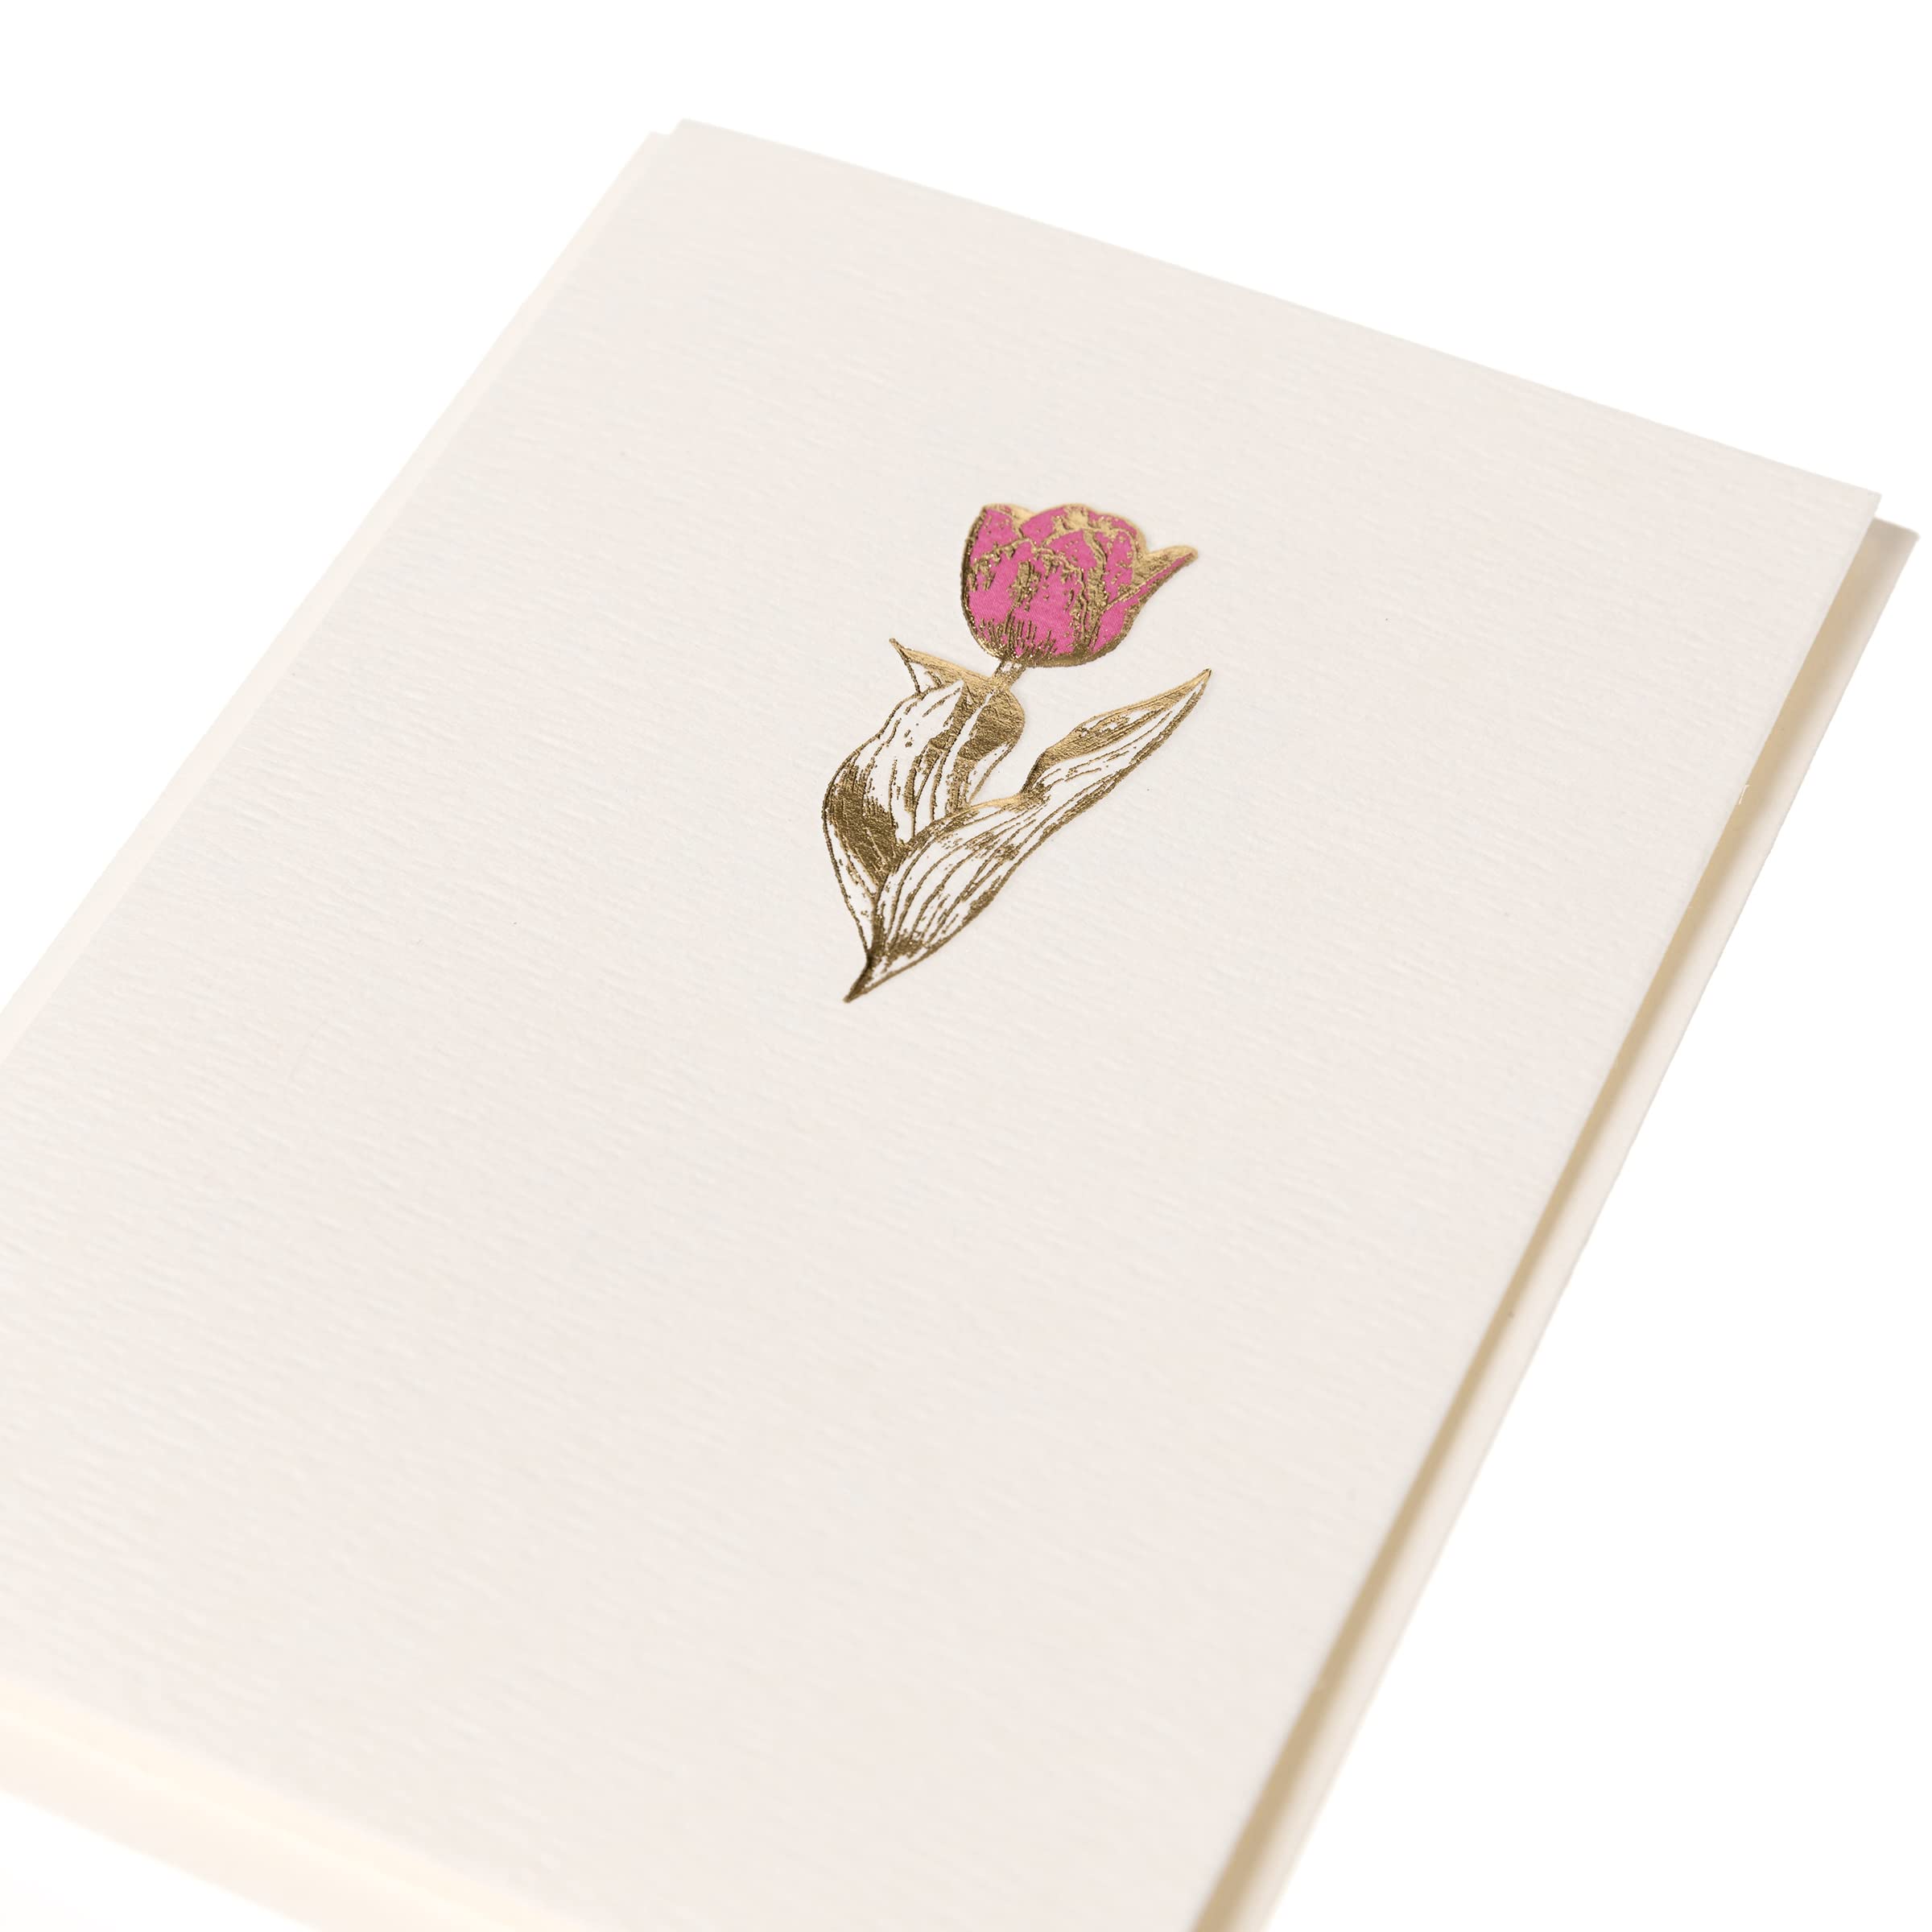 Graphique Tulip Cards | Pack of 10 Cards with Envelopes | Blank Inside | All Occasion Greetings | La Petite Presse Collection | Embossing and Gold Foil Accents | Boxed Set | 3.25